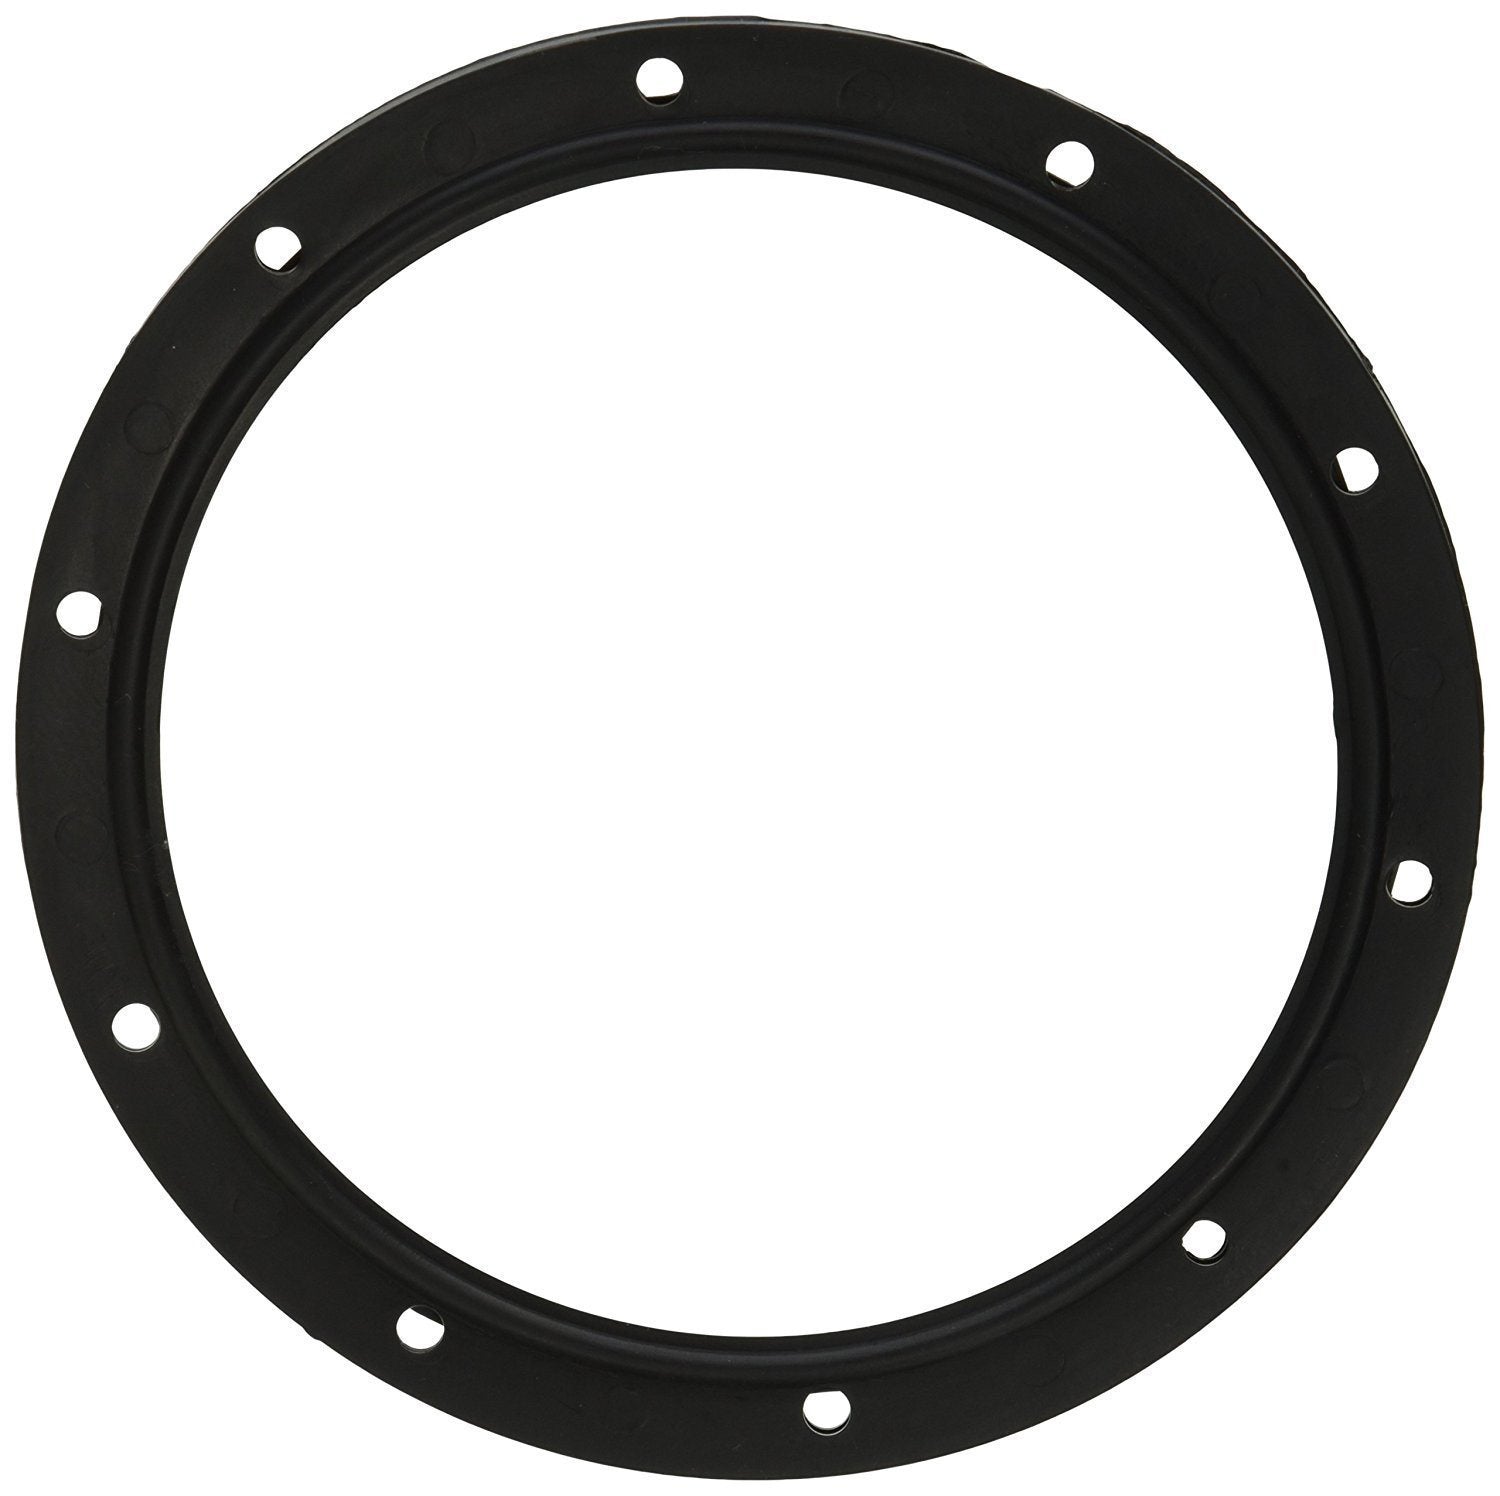 https://cdn.shopify.com/s/files/1/0990/0324/products/pooltone-replacement-for-sta-rite-lens-gasket-05057-0118-swimquip-10-hole-home-garden-pool-spa-sta-rite-345420_1600x.jpg?v=1663793861